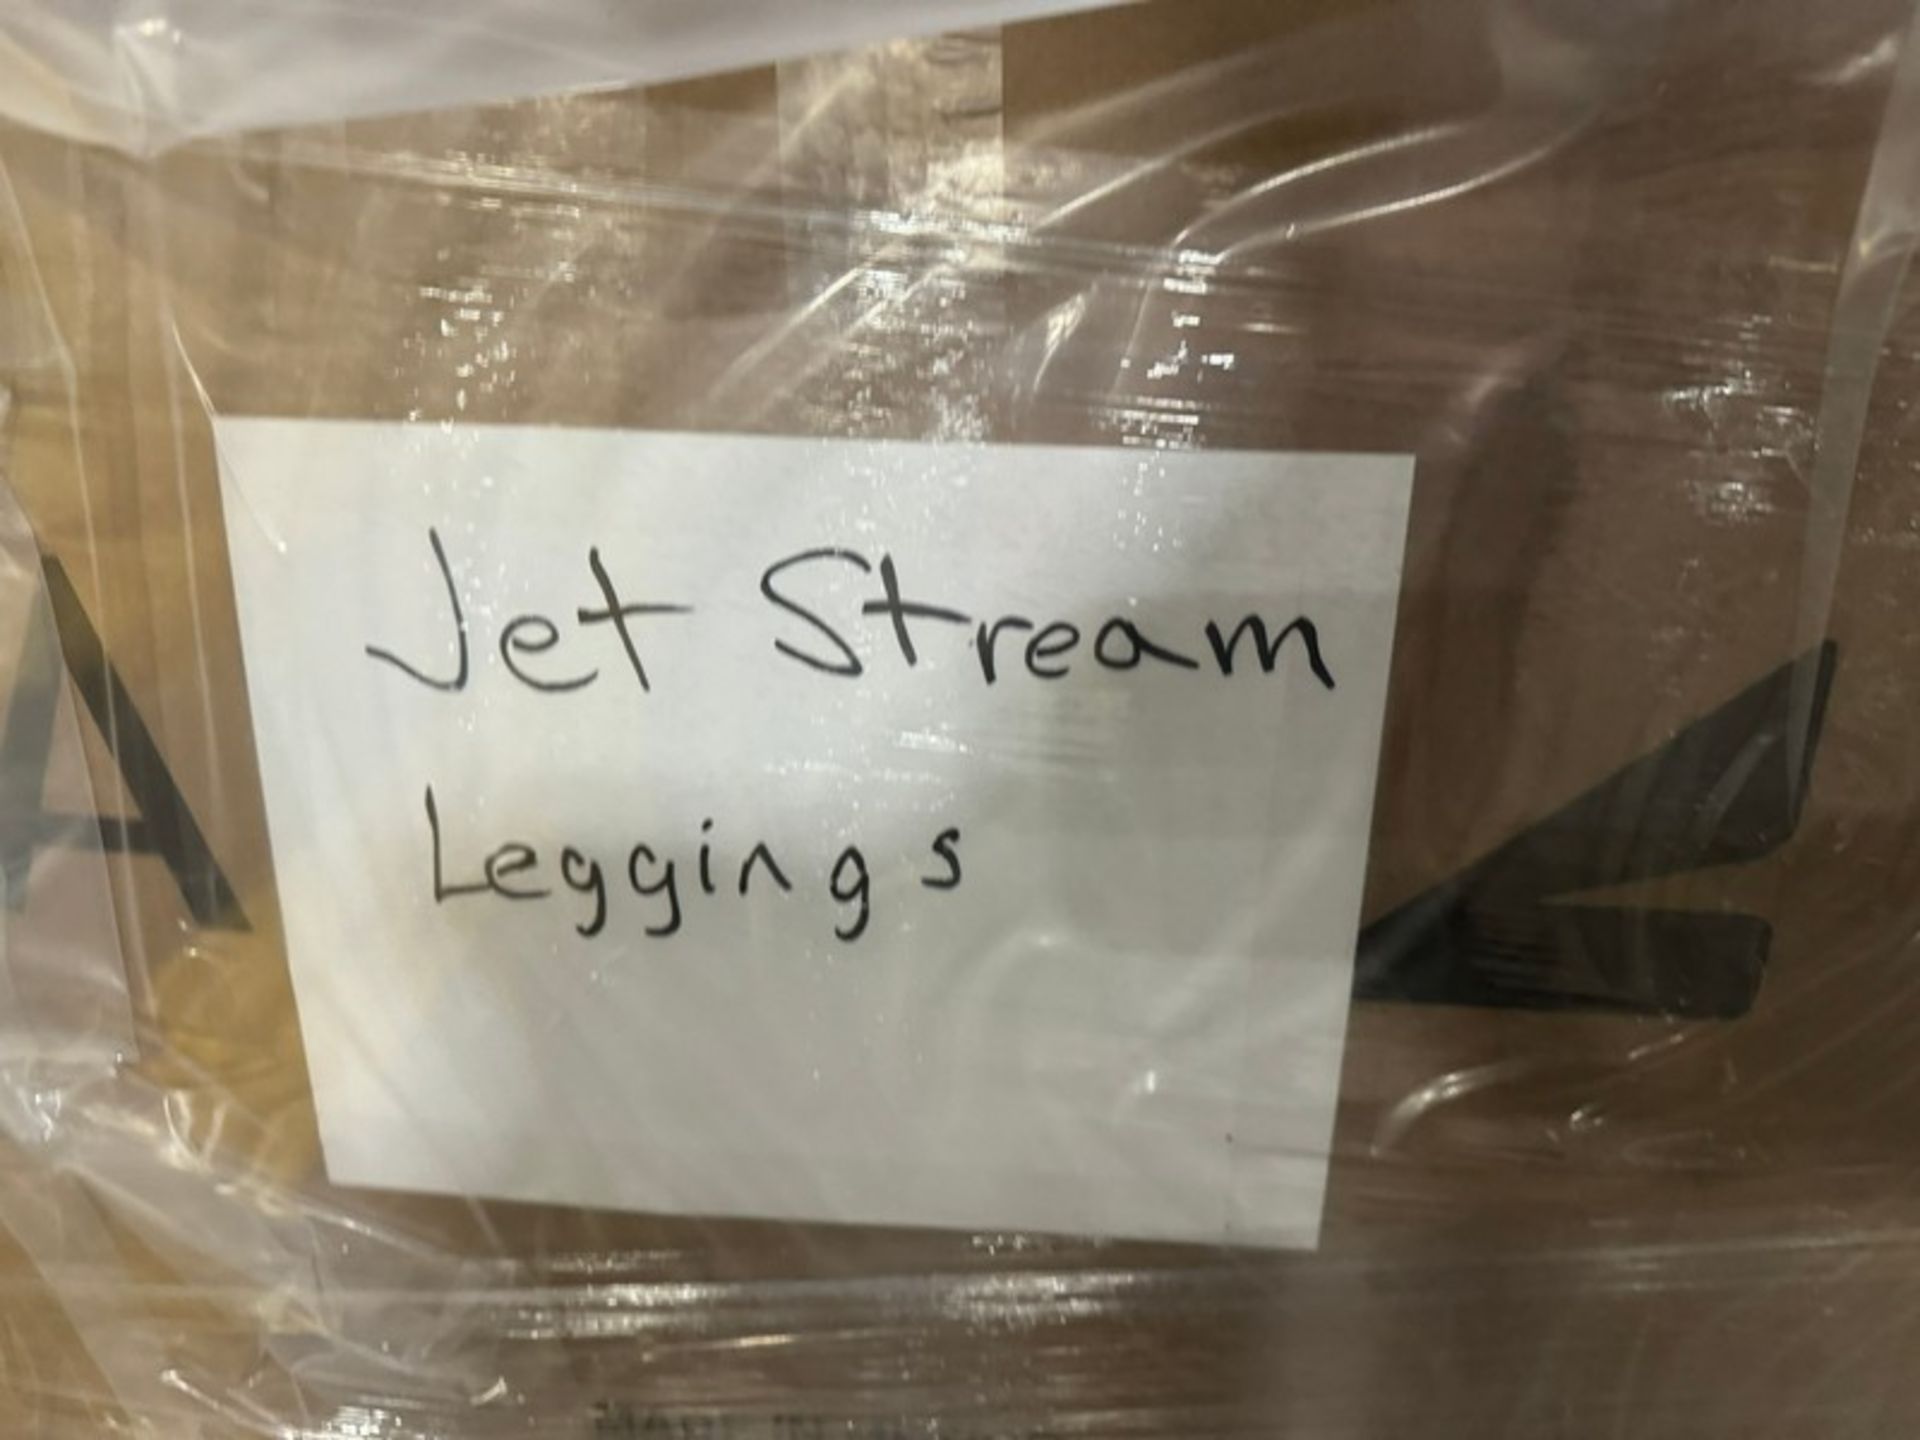 NEW Jet Stream Equipment, Includes NEW Jackets, Helmets, Pants, Leggins (LOCATED IN FREEHOLD, N.J.) - Image 7 of 9